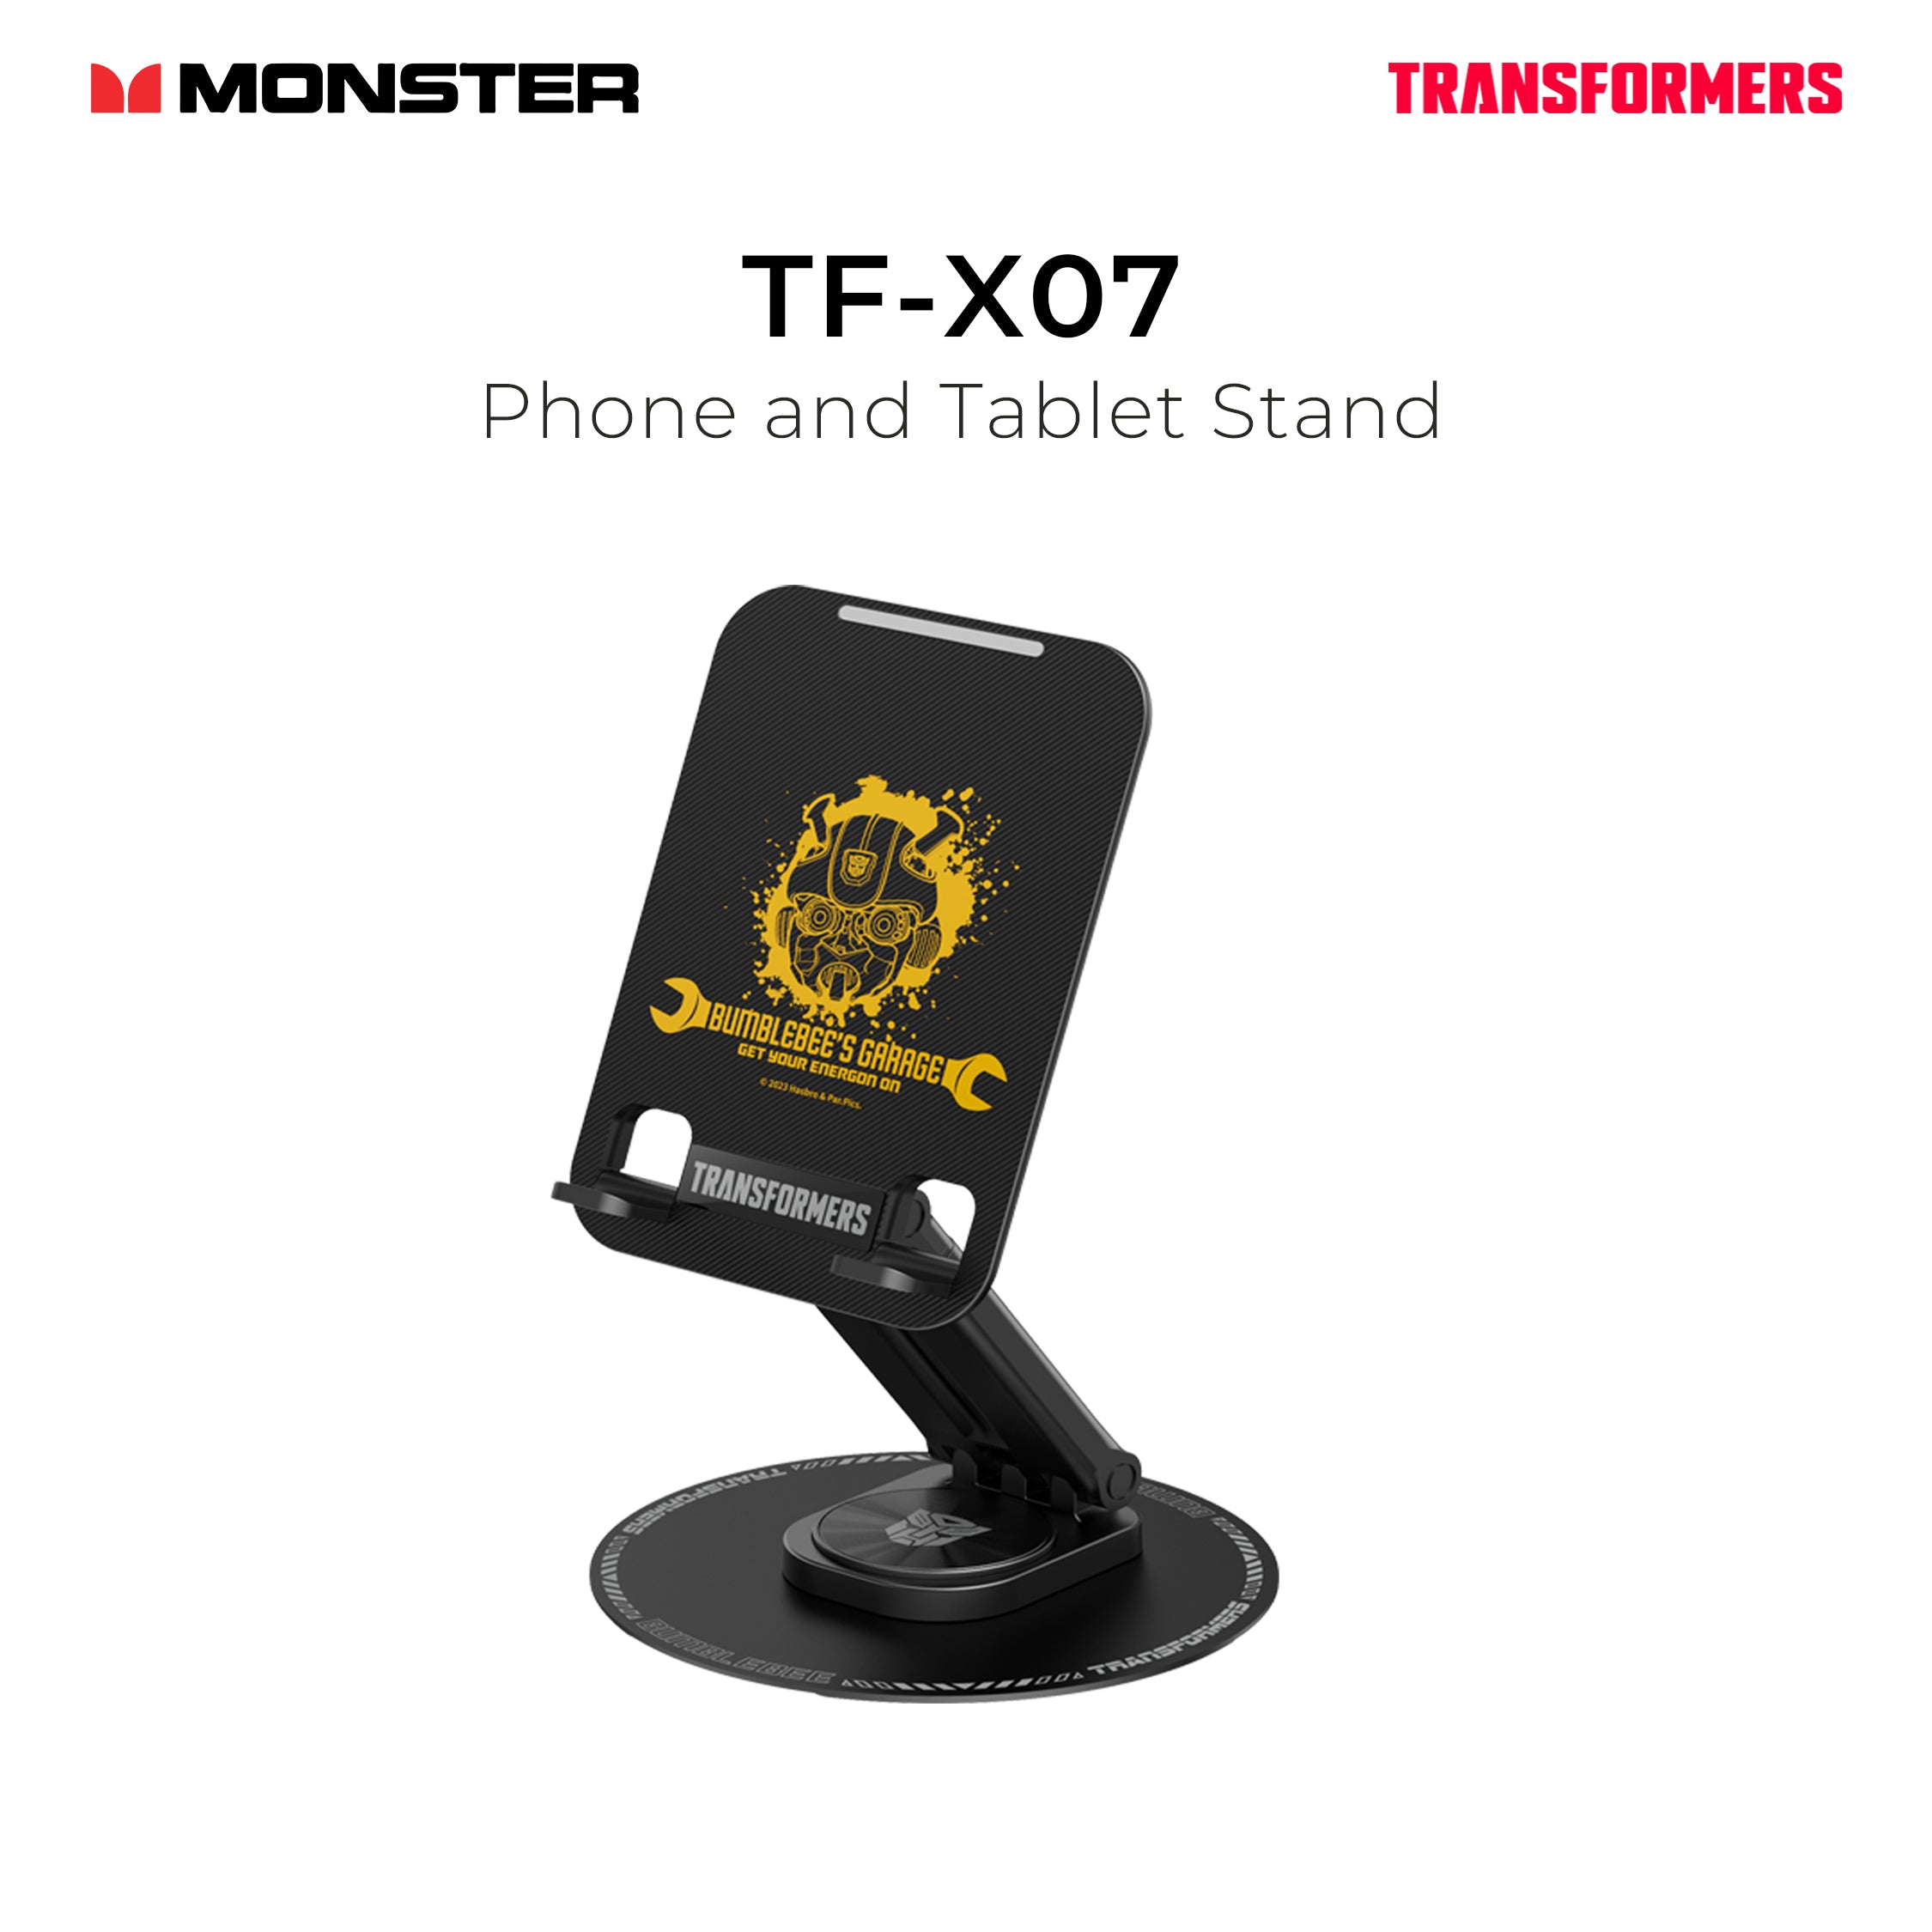 Monster Transformers Phone and Tablet Stand TF-X07